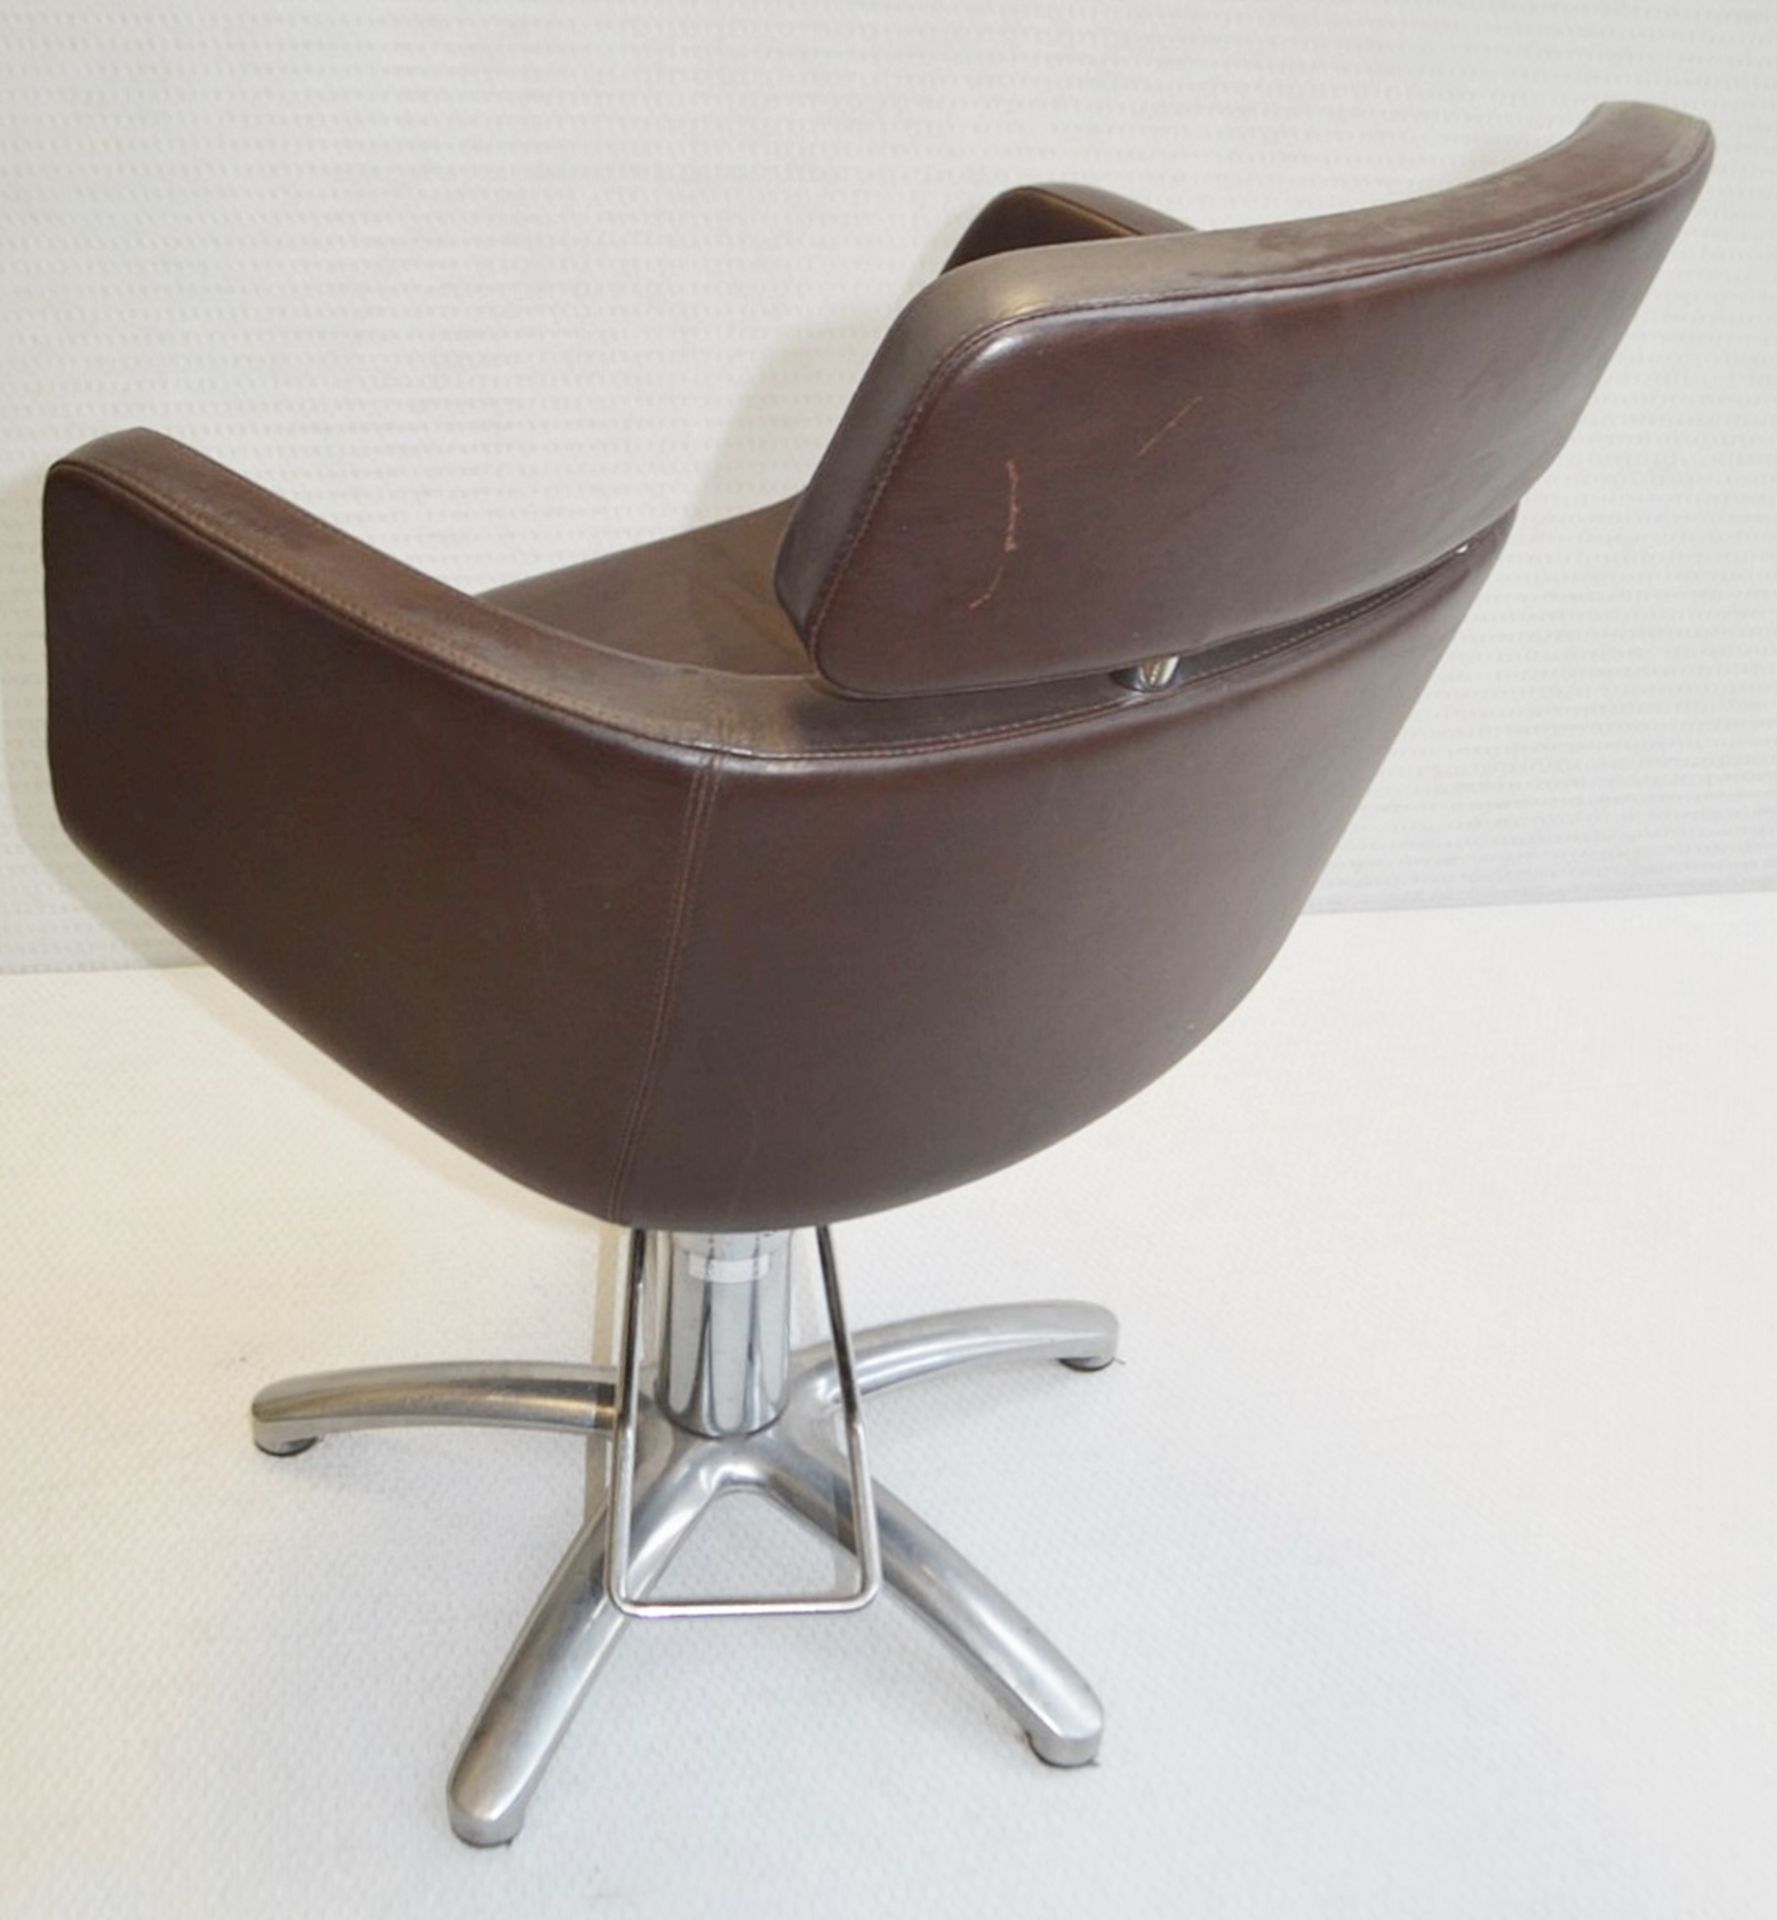 5 x Malet Branded Professional Hairdressing Salon Swivel Chairs In Brown - Each Is Supplied With A - Image 5 of 7